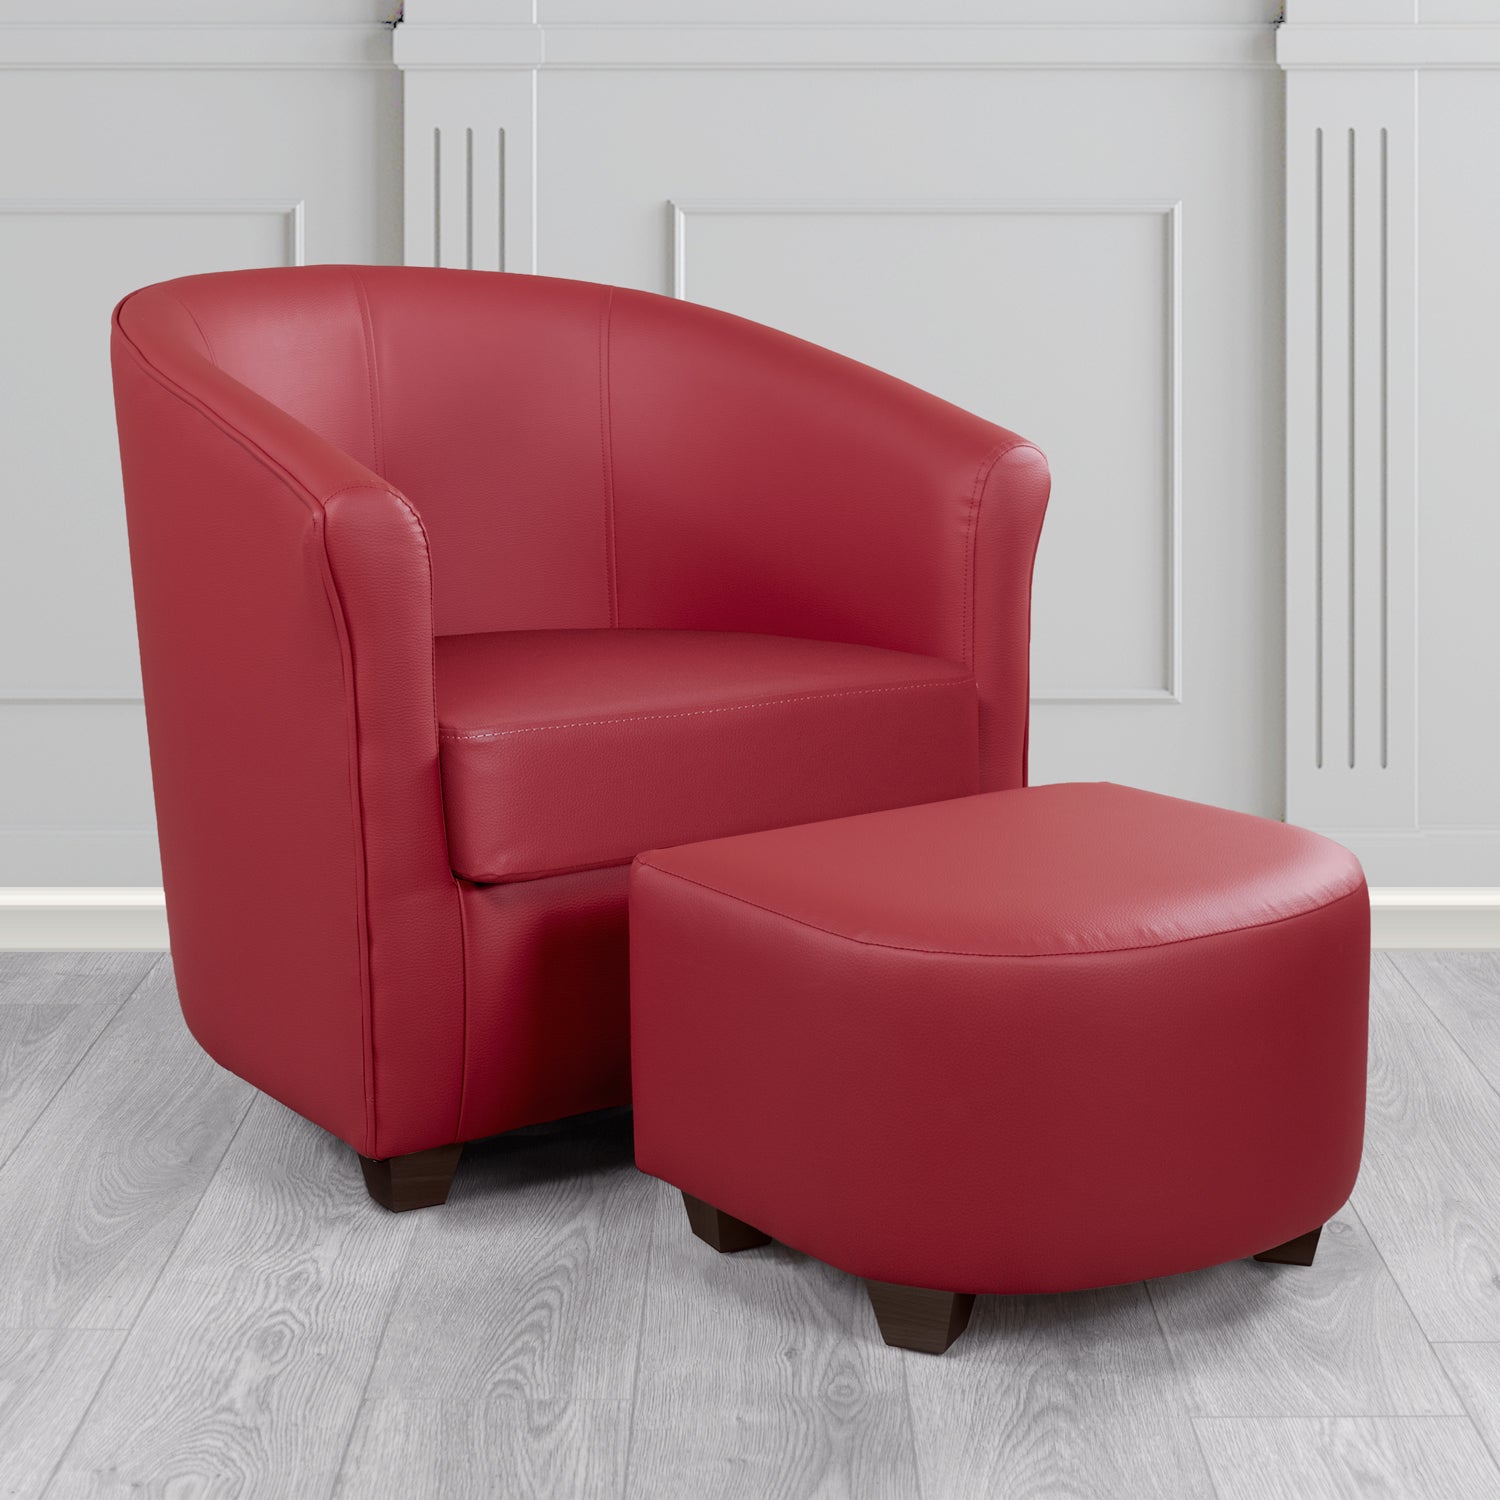 Cannes Tub Chair with Footstool Set in Just Colour Rosso Crib 5 Faux Leather - The Tub Chair Shop